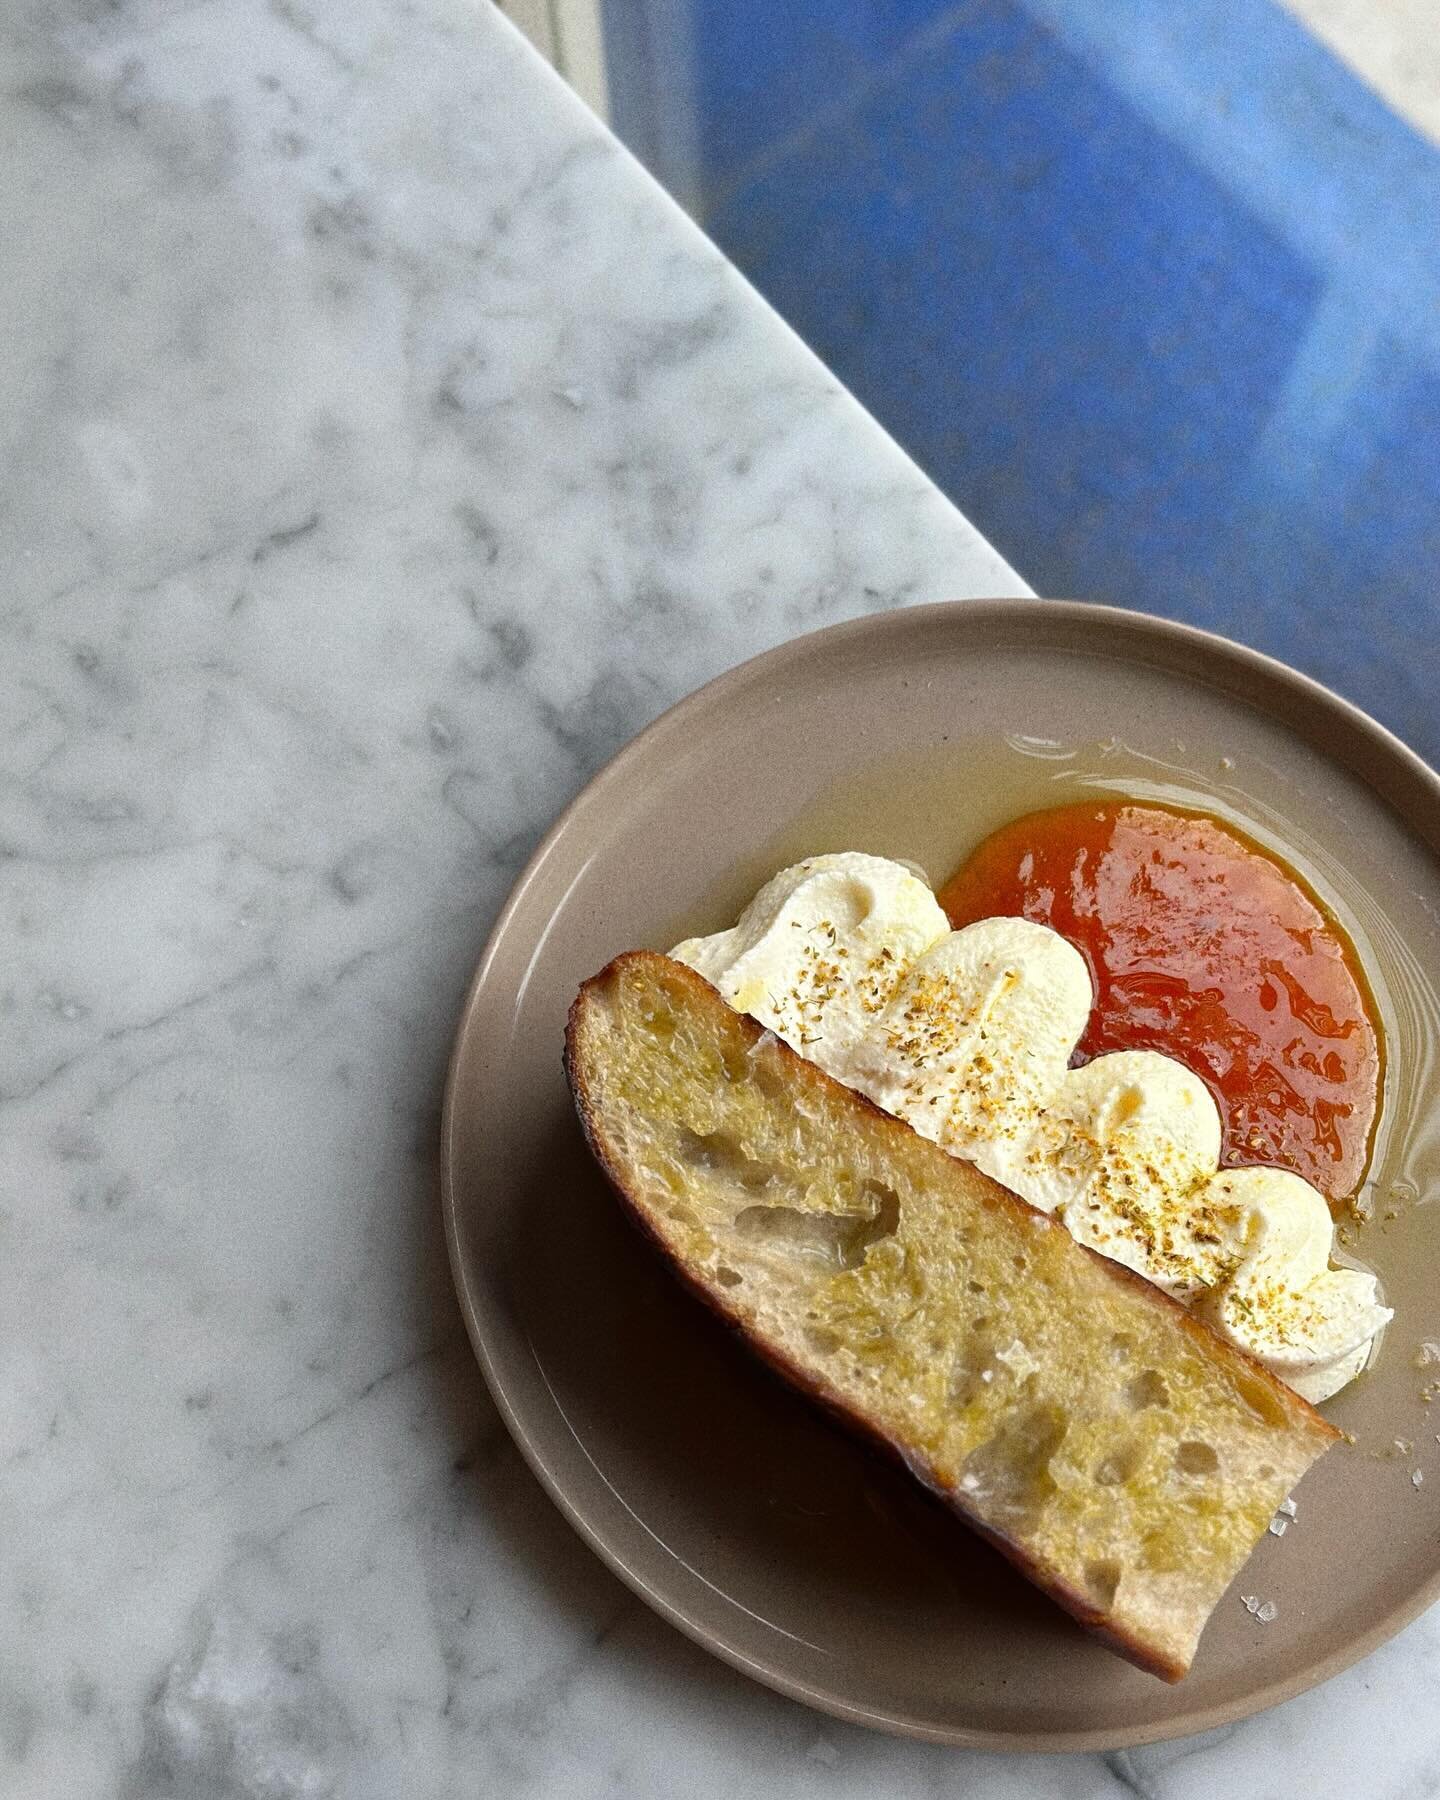 Sourdough focaccia with housemade ricotta and kumquat preserve :&rsquo;) this focaccia has been lovingly in the works by @ryanmmoser for well over a month and we&rsquo;re so excited to have it on the menu!